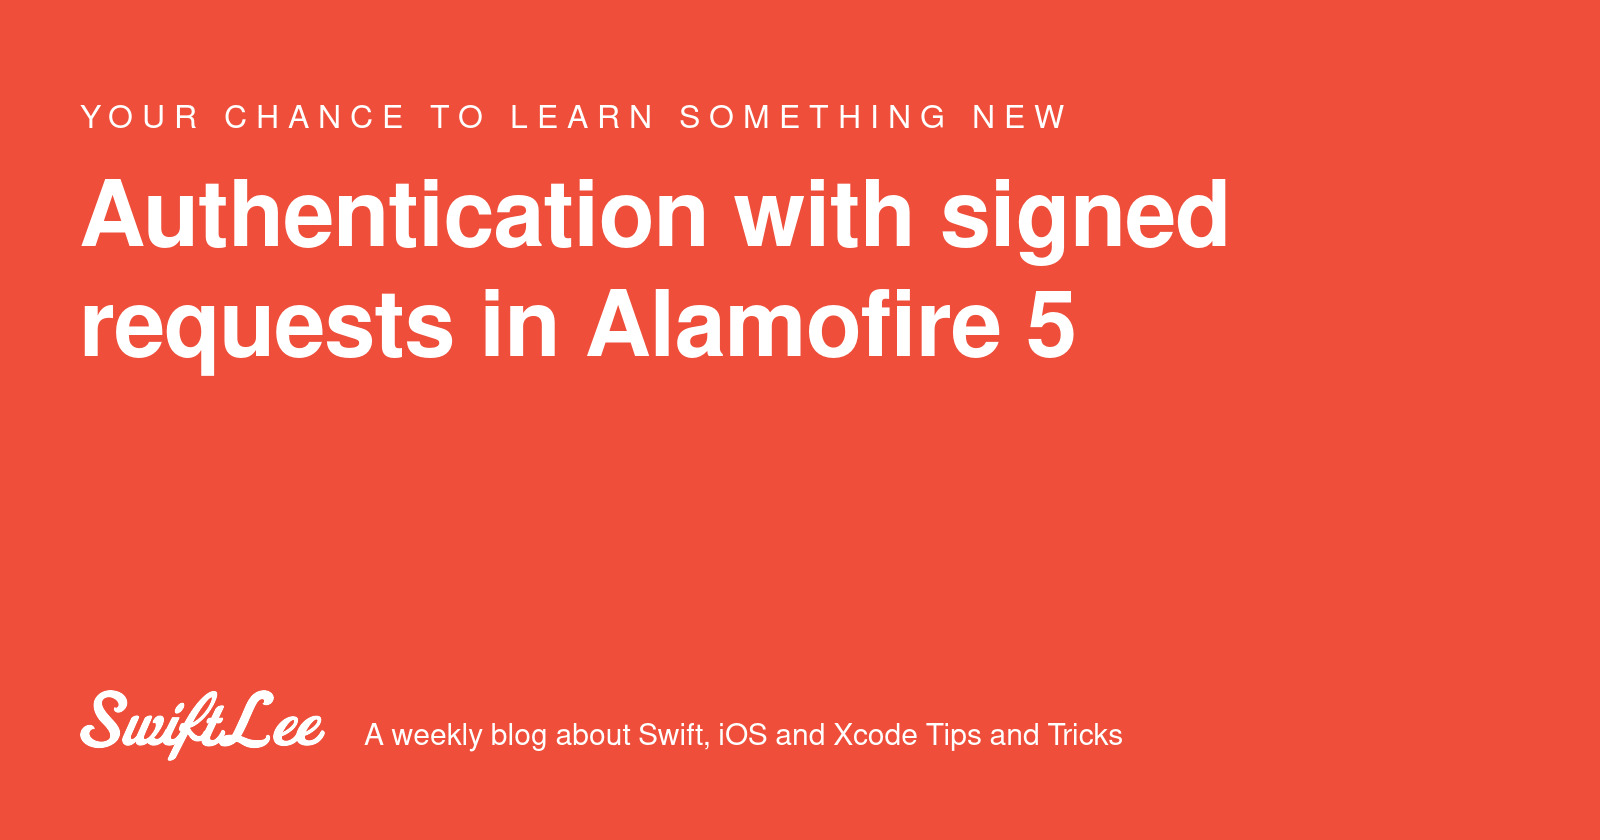 Alamofire request with authorization bearer token and additional